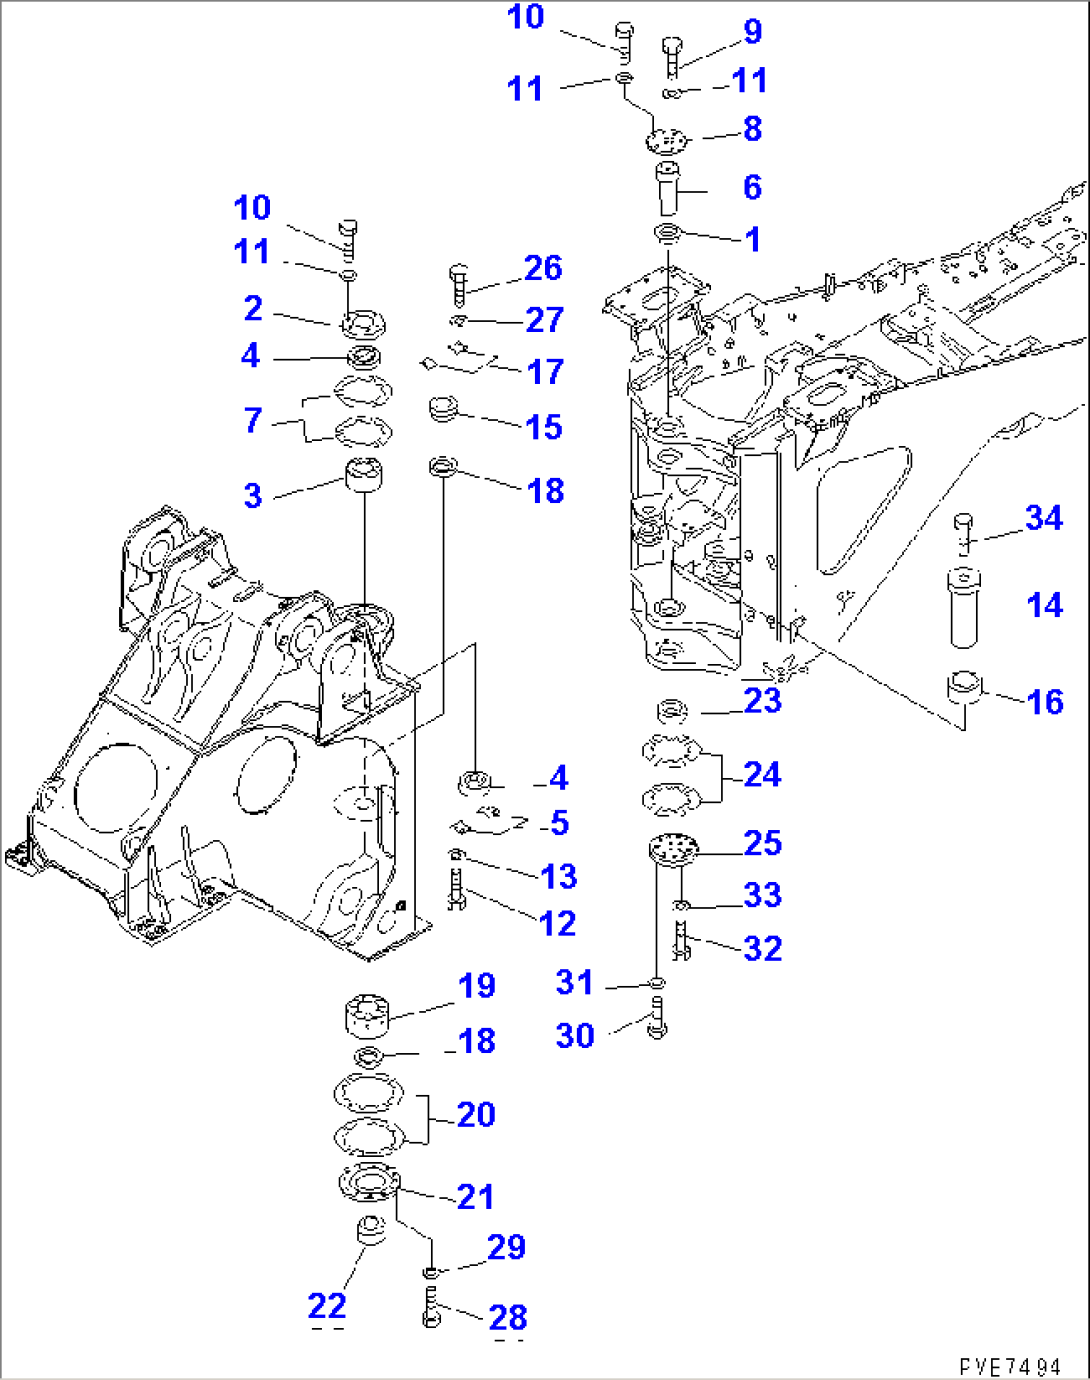 HINGE PIN (FOR FRONT AND REAR FRAME CONNECTING)(#50001-50041)